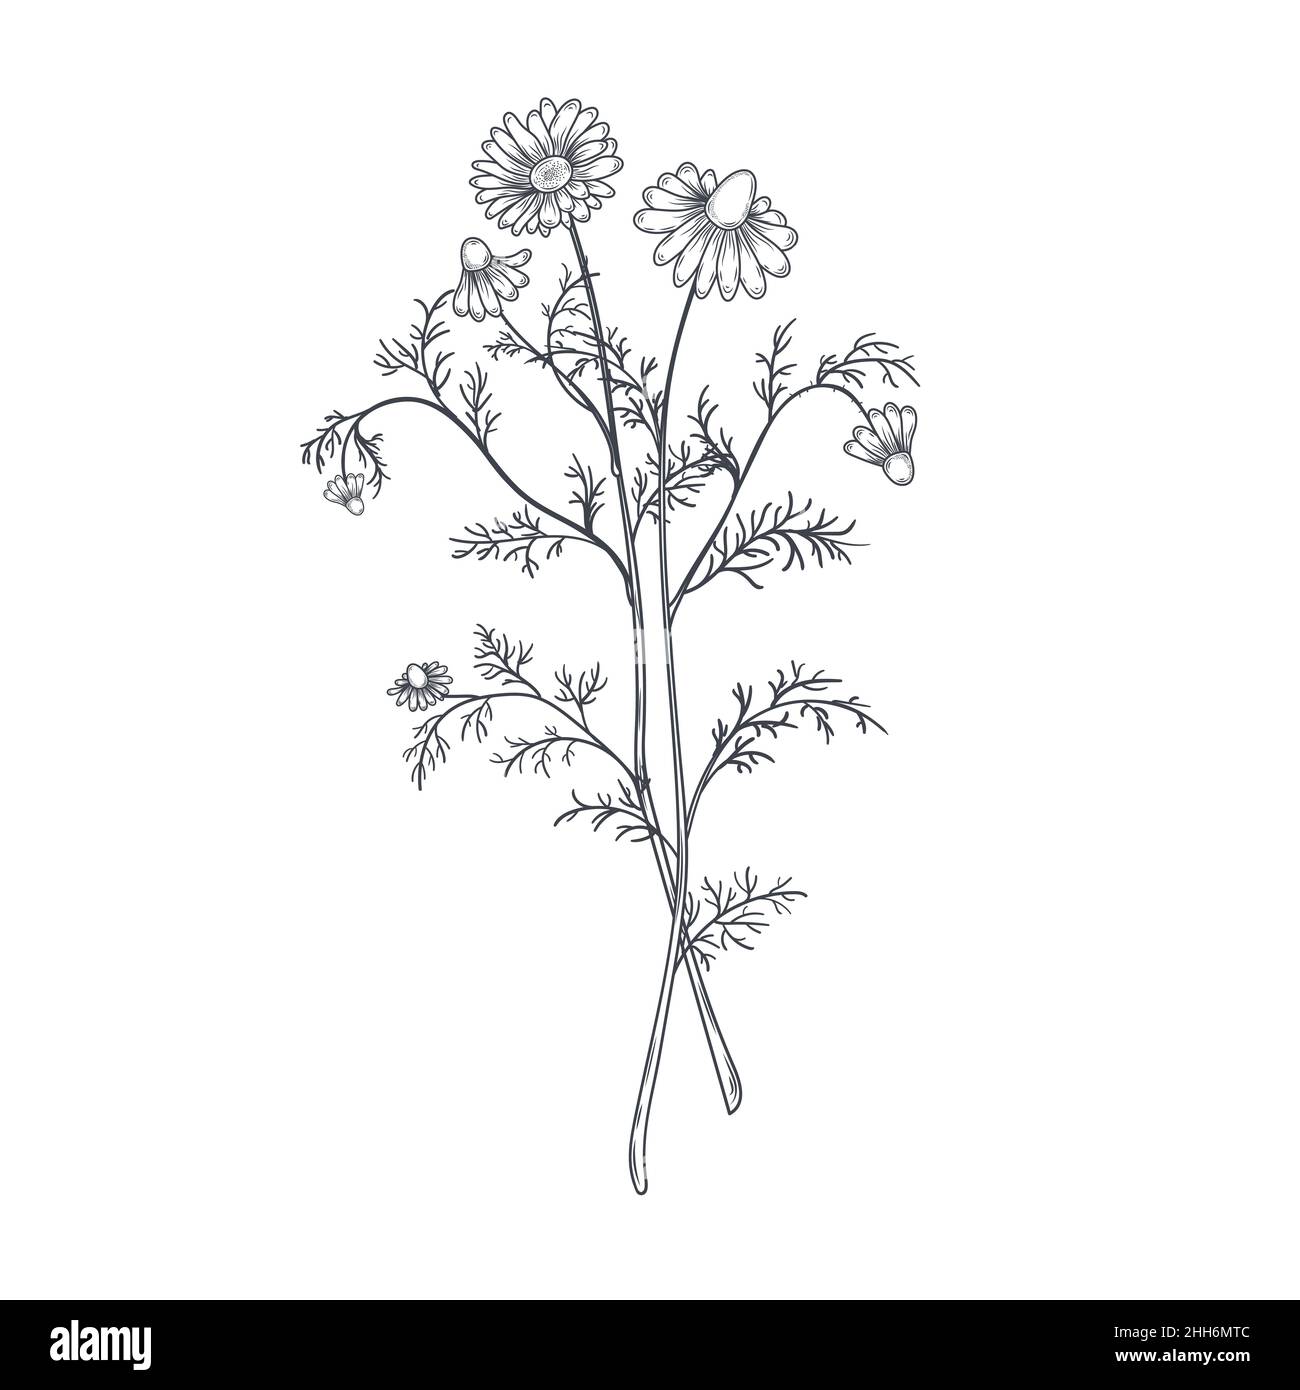 Ink chamomile herbal illustration. Hand drawn botanical sketch style. Stock Vector